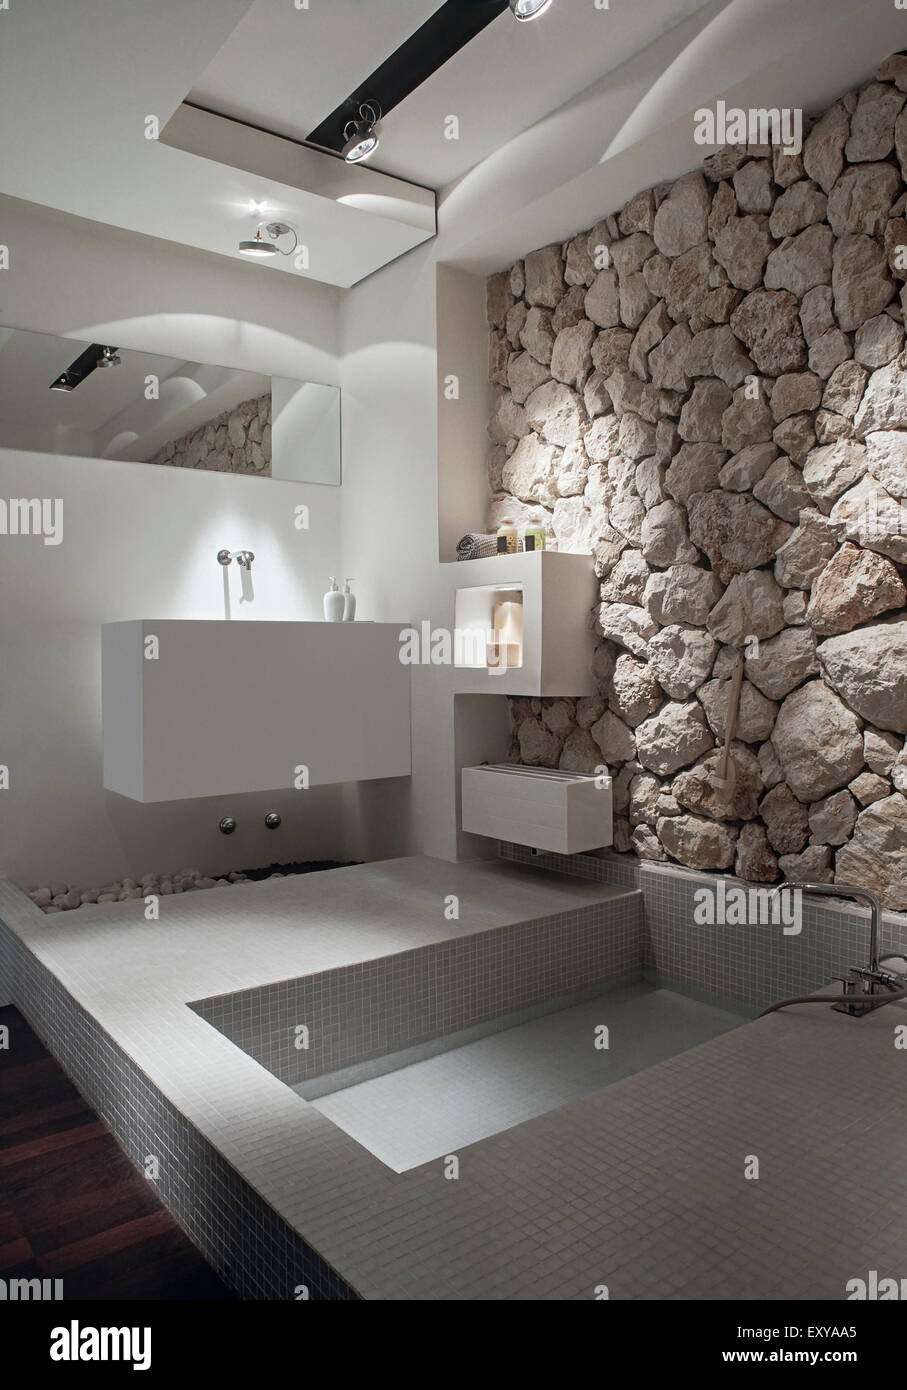 foreground of bathtub overlooking on washbasin in a modern bathroom whose wall is coated with stone Stock Photo